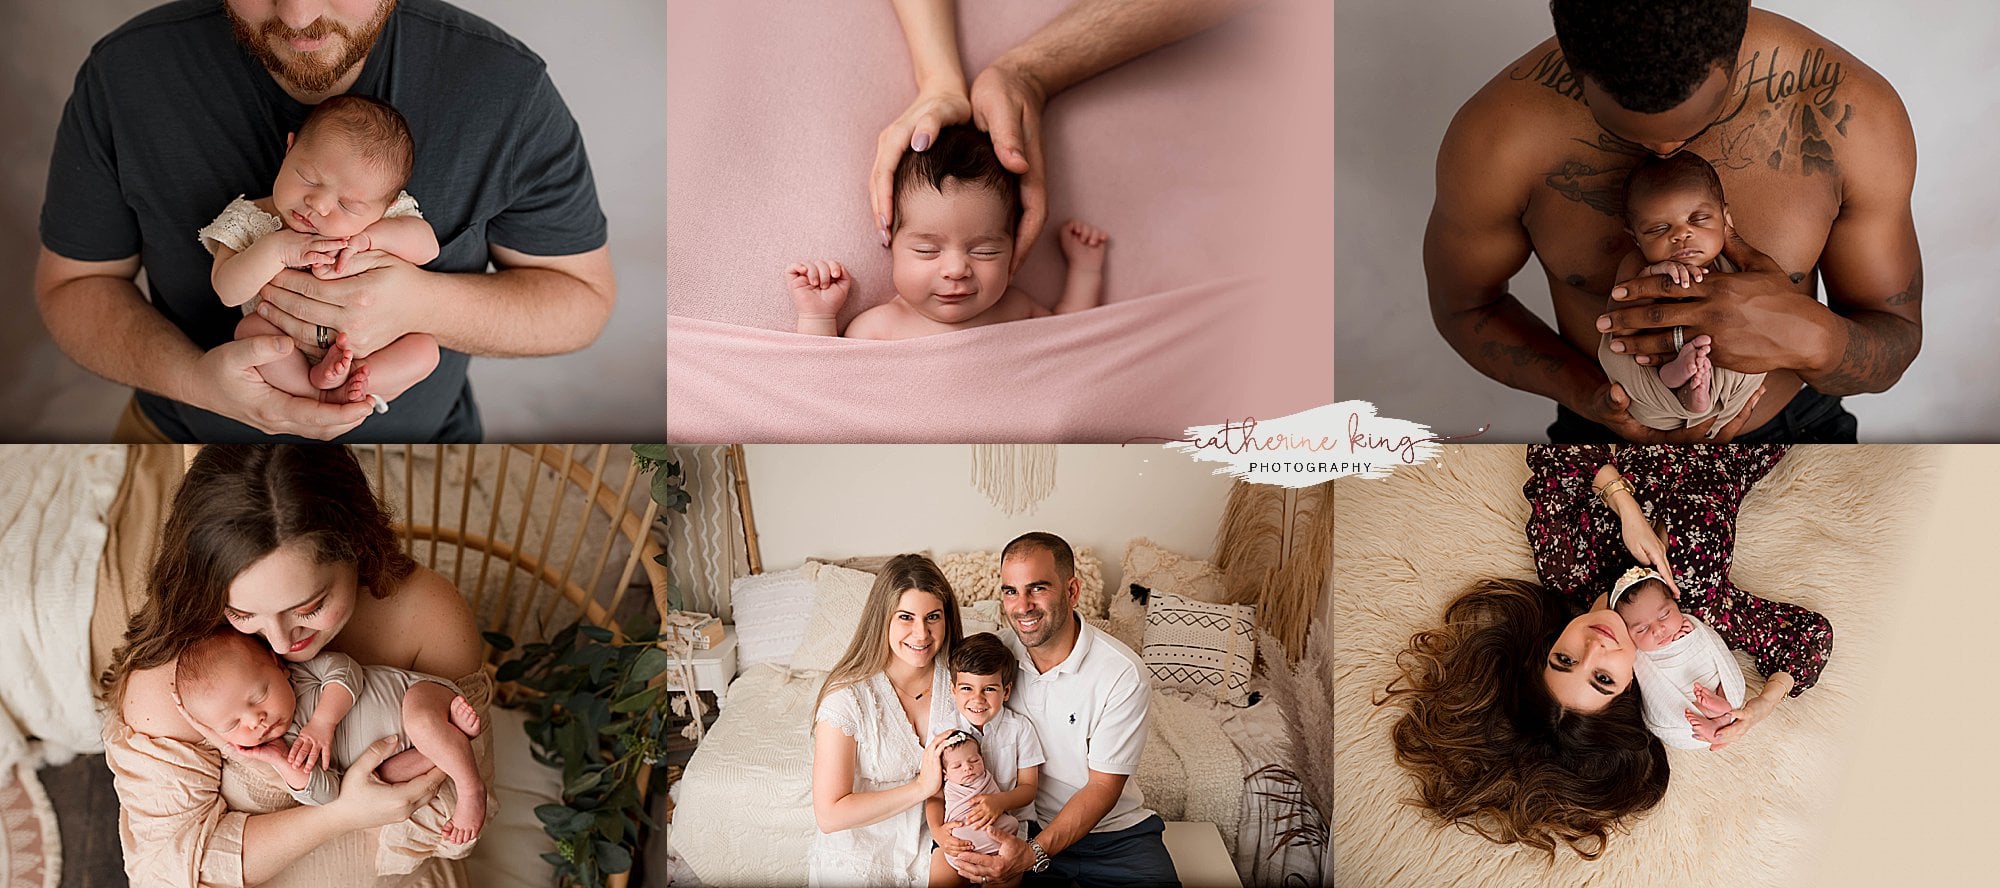 comprehensive guide on choosing a newborn photographer that's right for you and your family